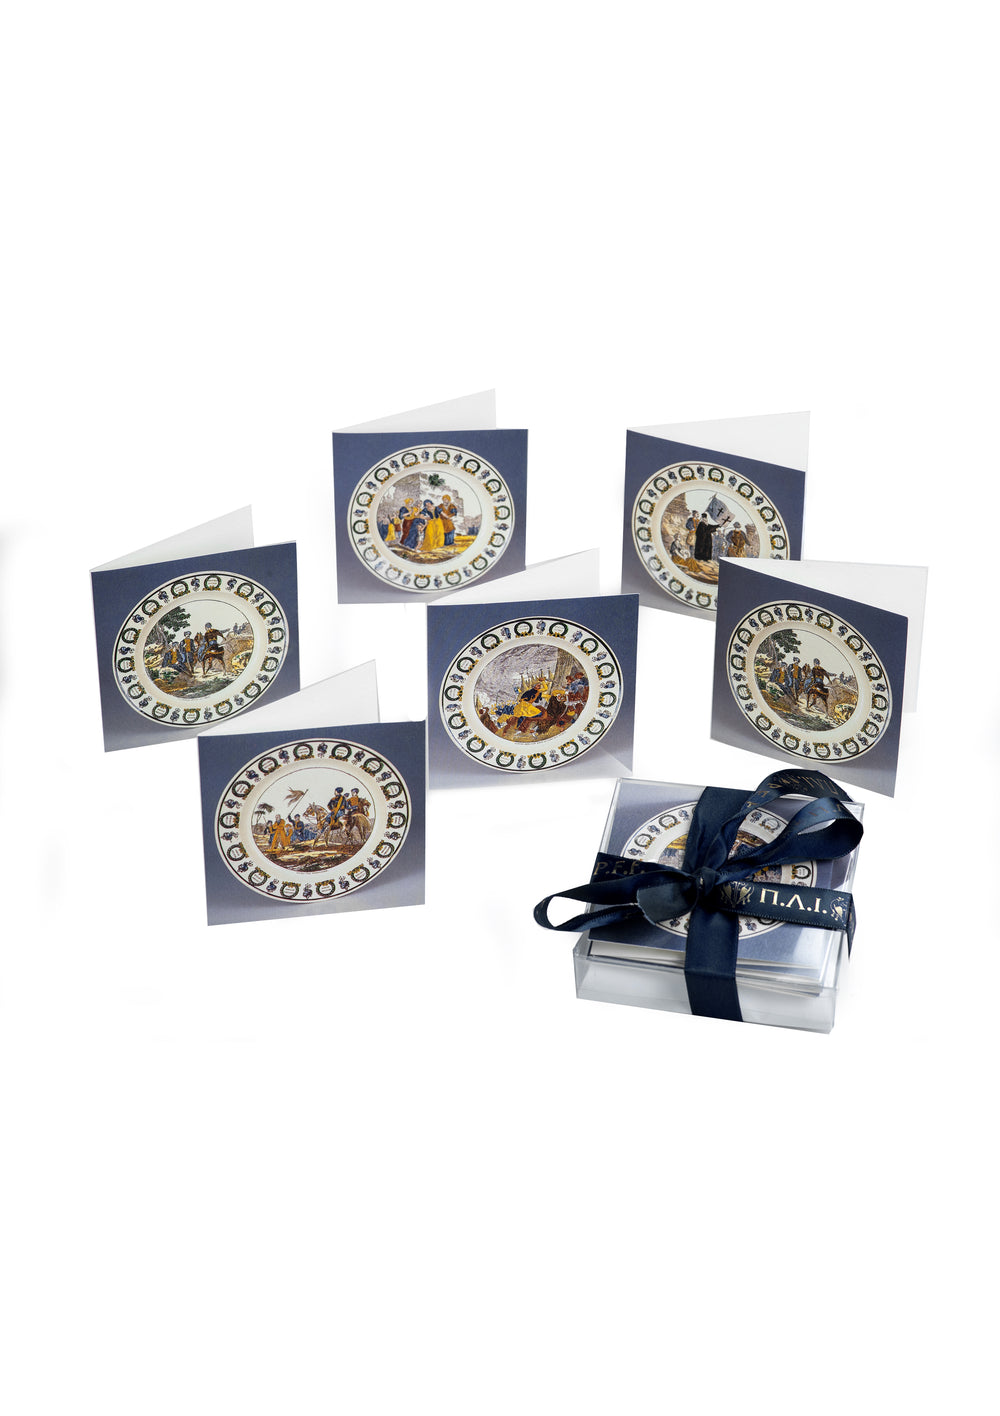 Cards-Plates with philhellenic subject